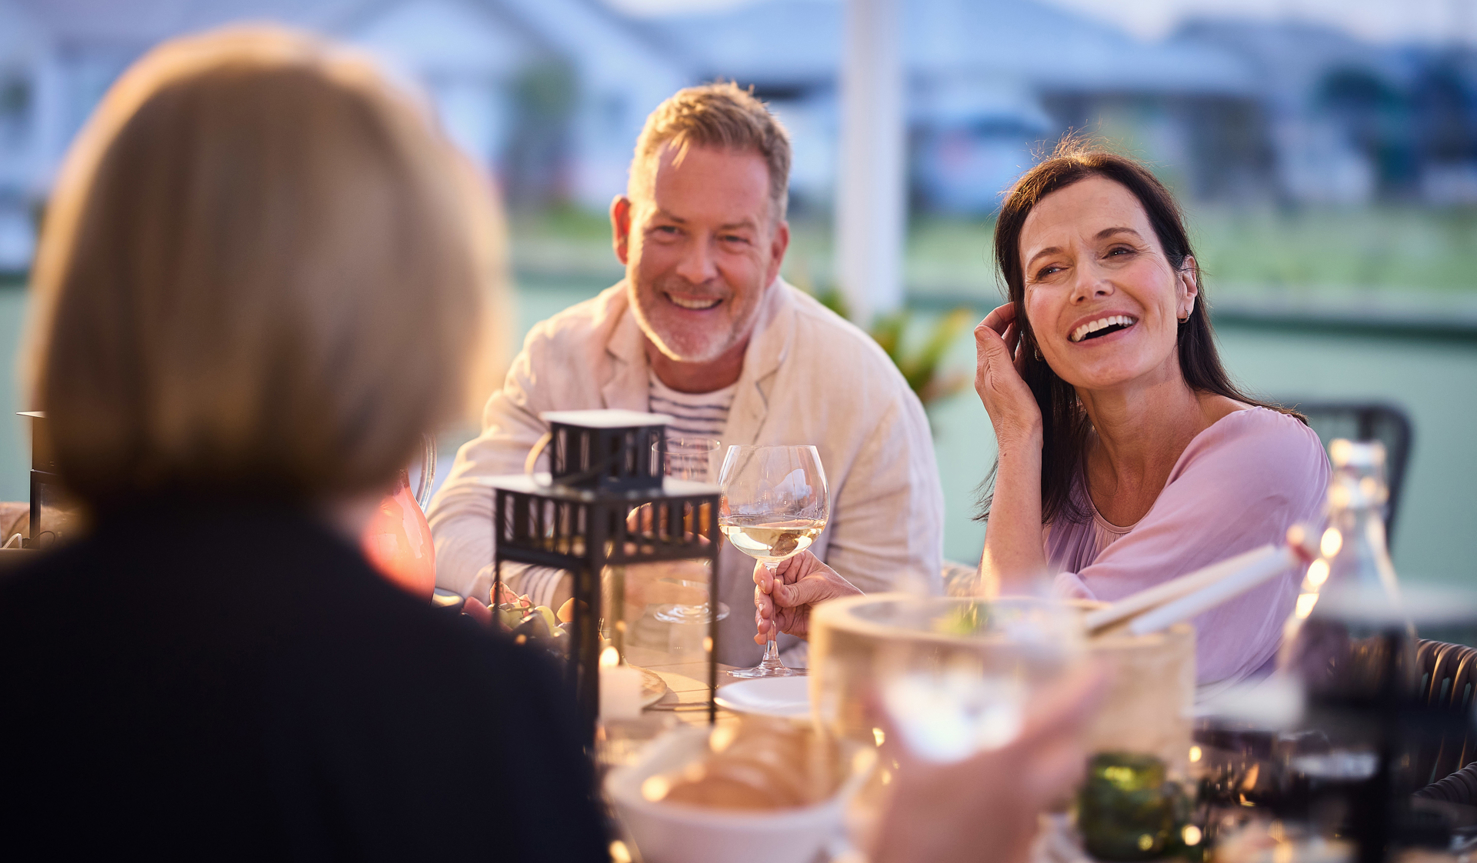 Homebuyer couple having a dinner party with friends